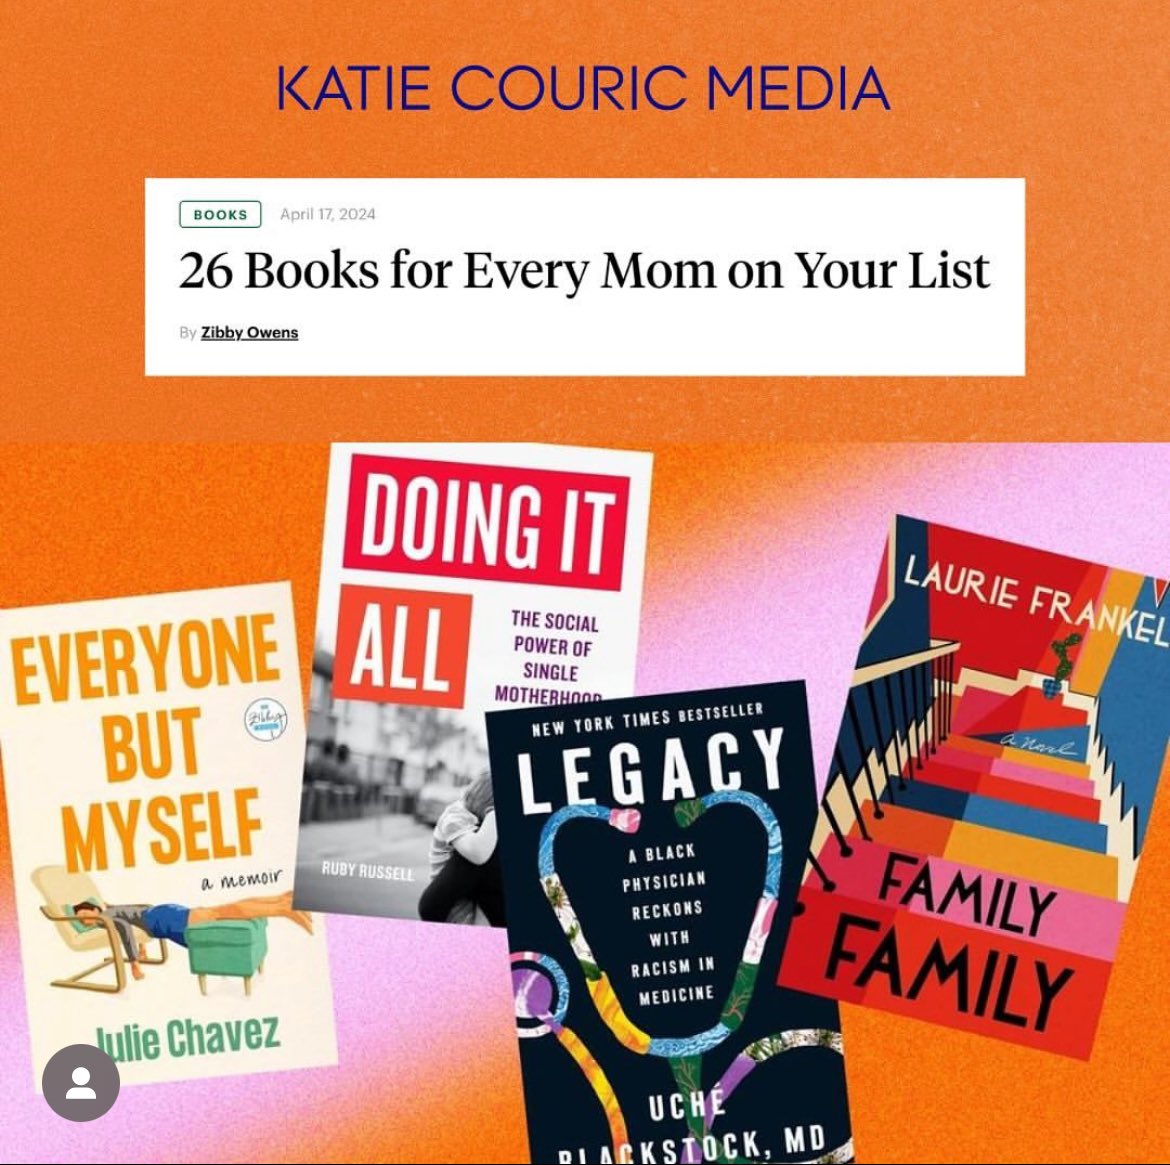 Looking for a Mother’s Day gift? @katiecouric Media has chosen my best seller LEGACY: A Black Physician Reckons with Racism in Medicine 👩🏾‍⚕️🩺 as one of their 26 Books for Every Mom on Your List! My late mother, the original Dr. Blackstock, was my inspiration for writing LEGACY!